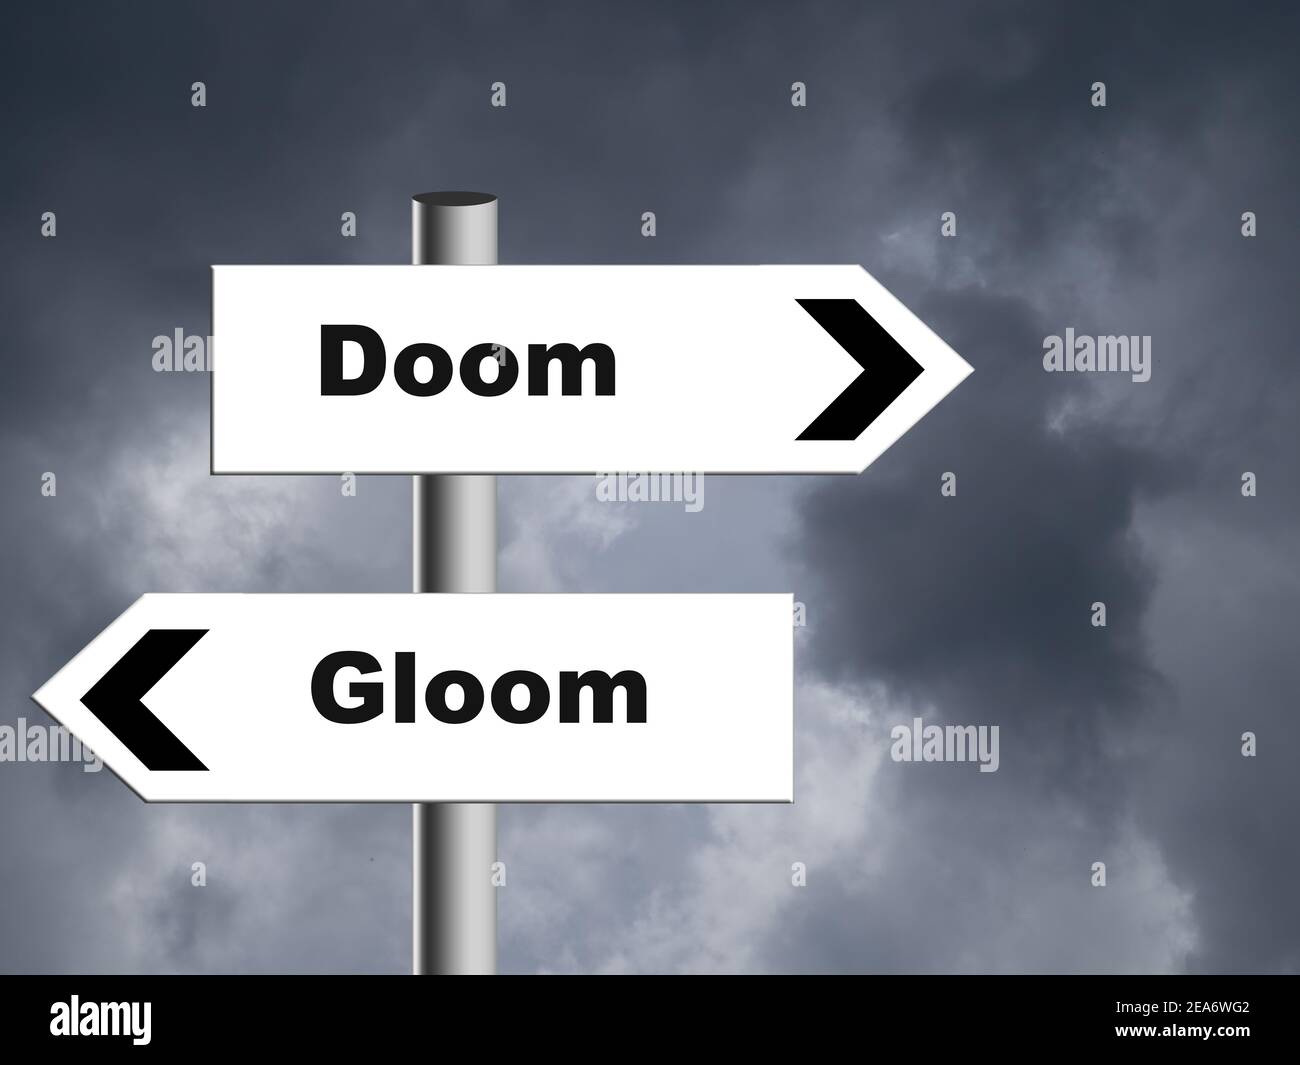 Doom and gloom sign suitable for a variety of business, political, and personal themes. Stock Photo